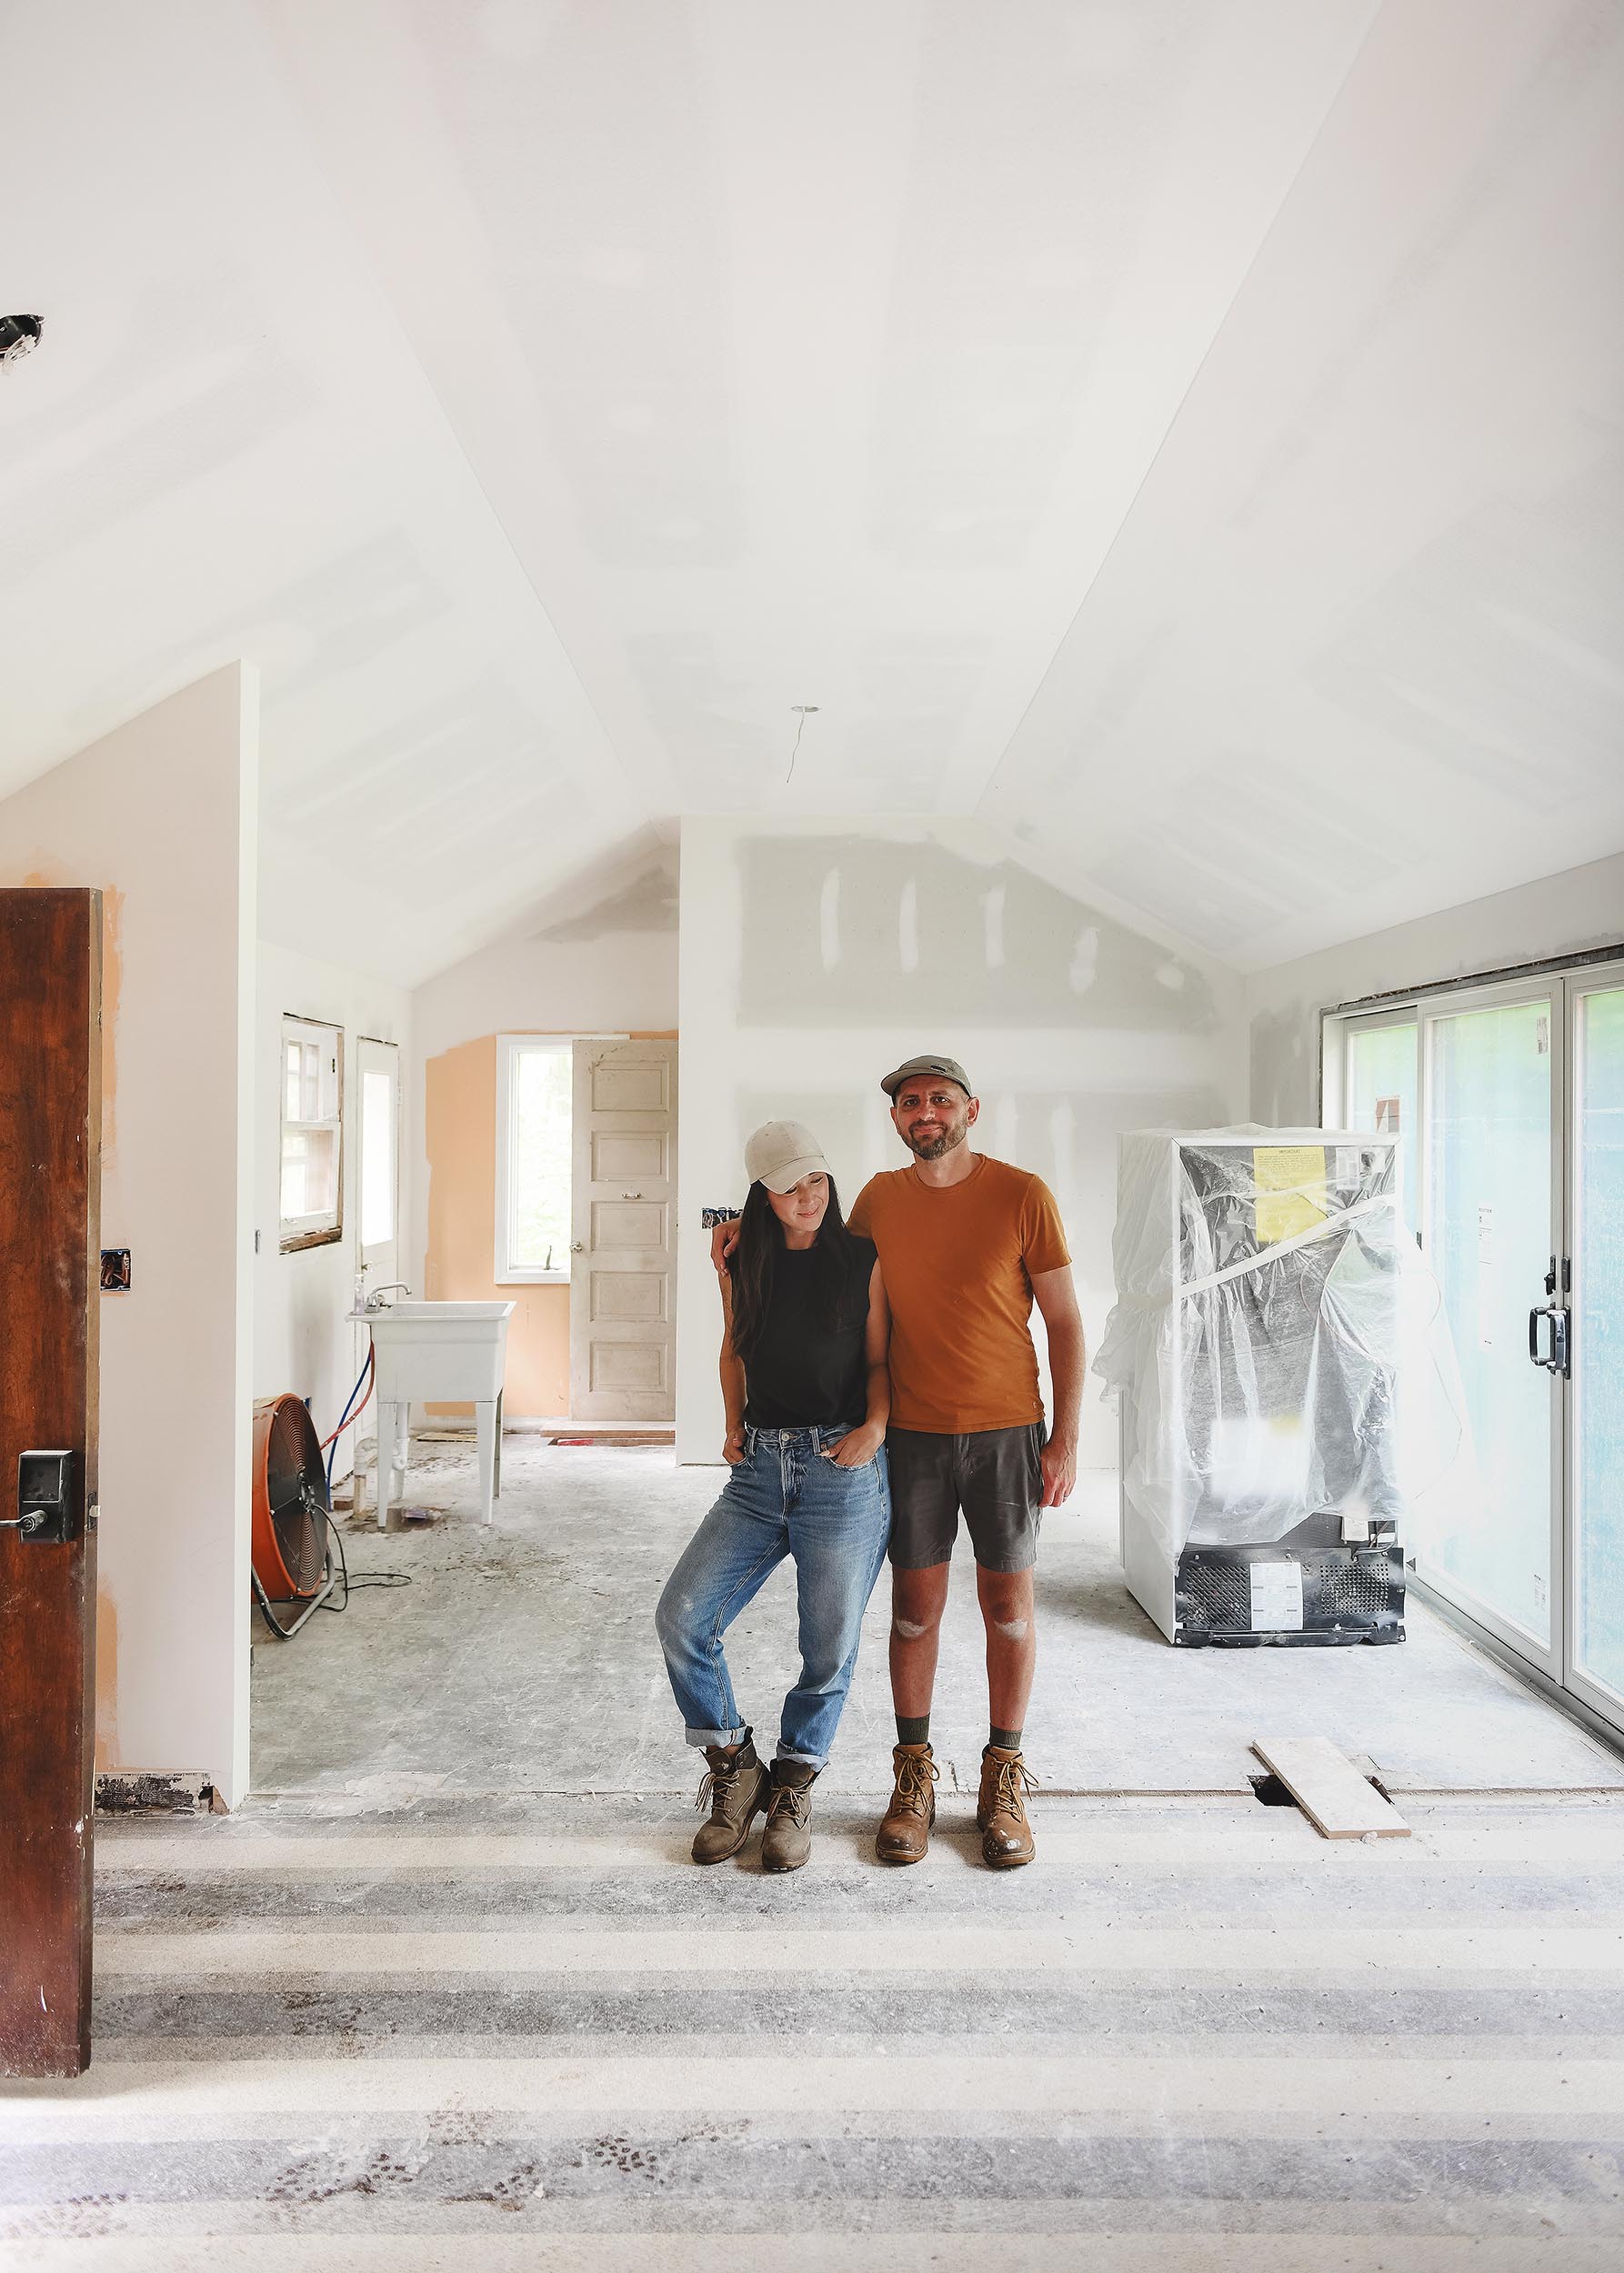 Kim and Scott in the main living space, mid-construction | via Yellow Brick Home